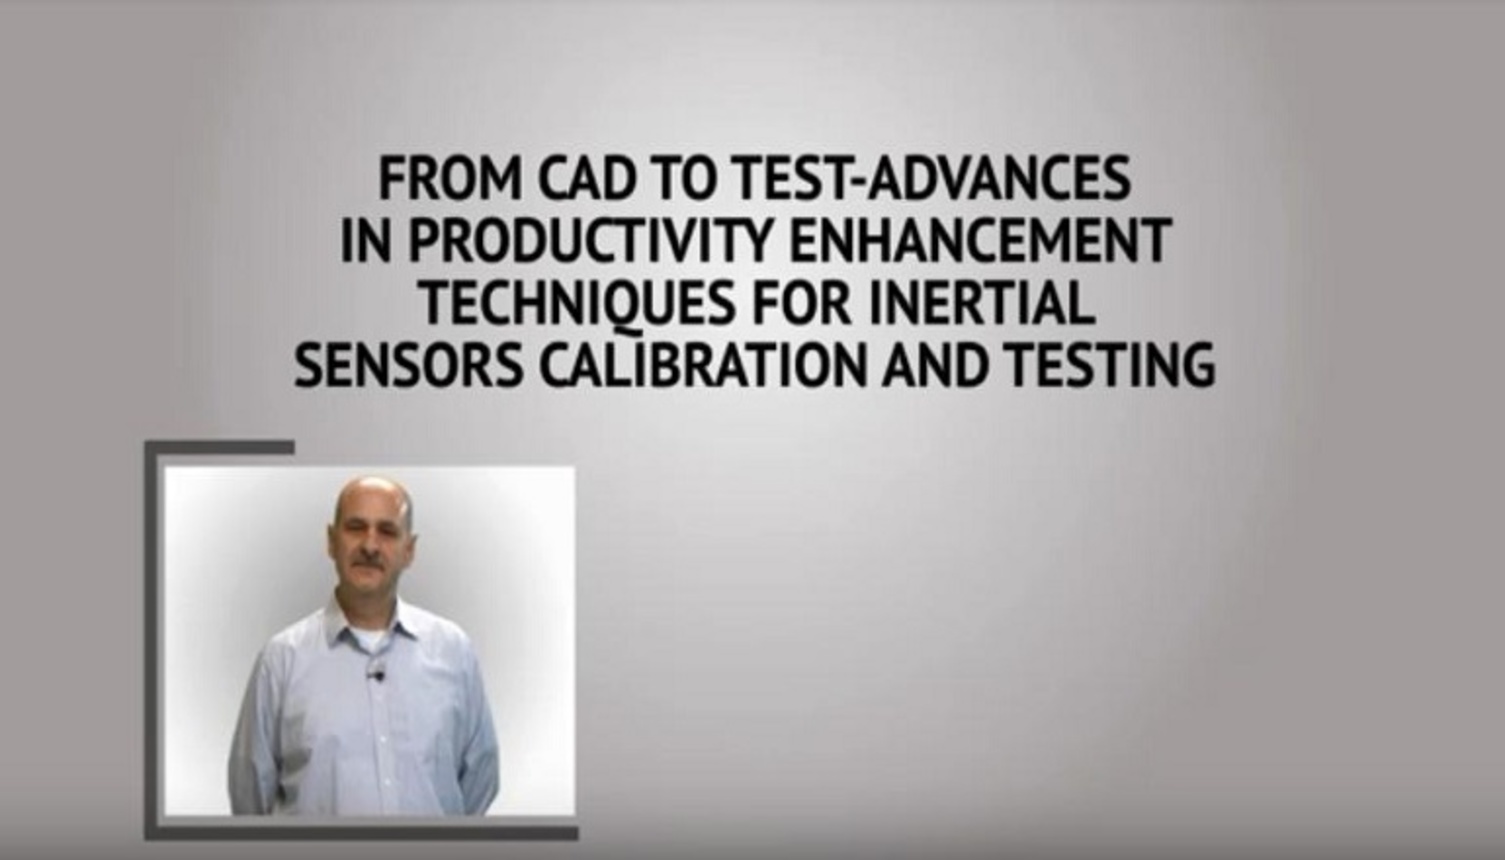 From CAD to Test - Advances in Productivity Enhancement Techniques for Inertial Sensors Calibration and Testing